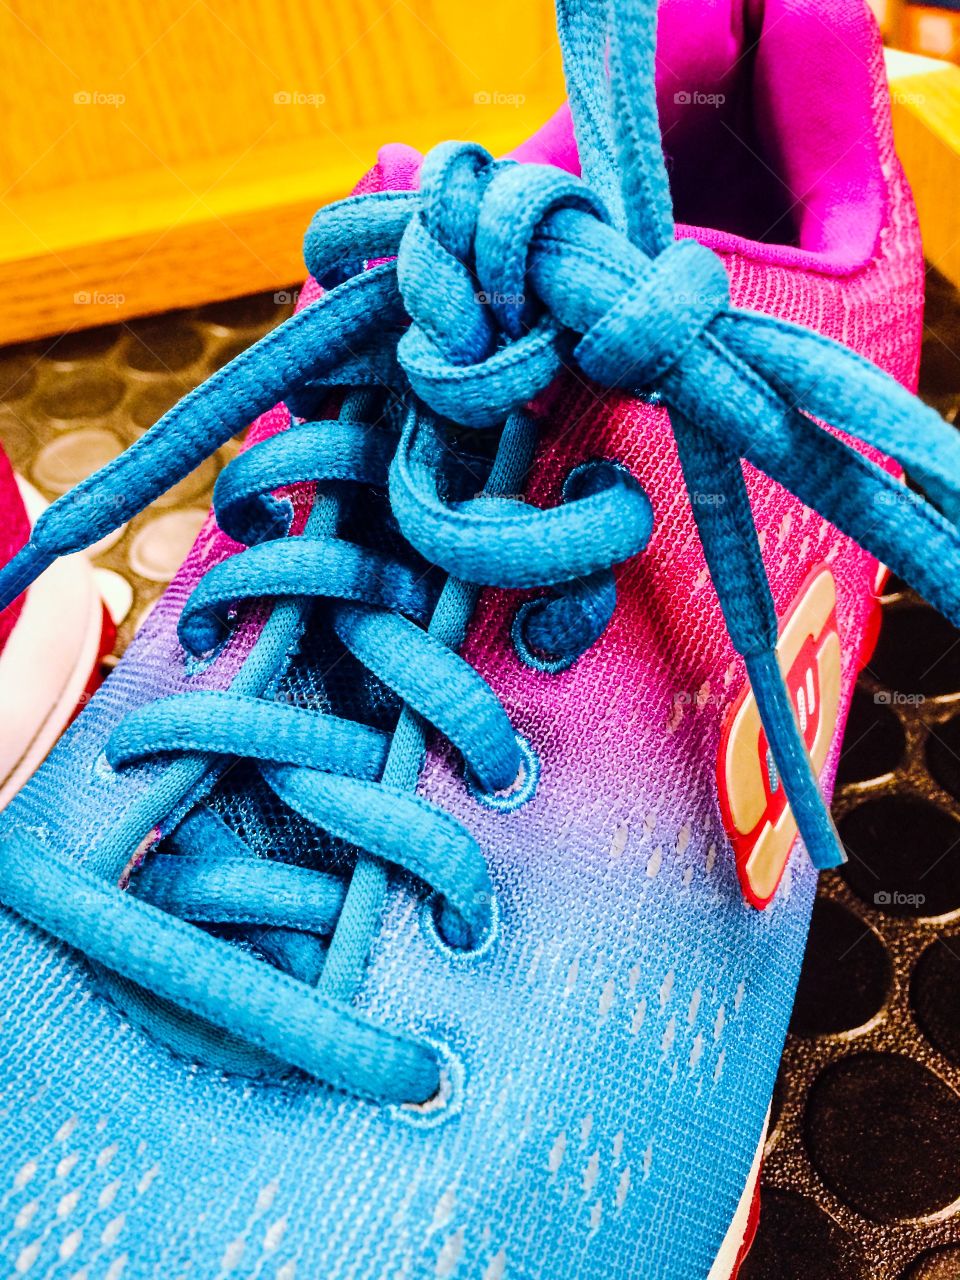 Kewl Knot. Very colorful shoes with a way kewl knot that I don't think is ever coming untied. 